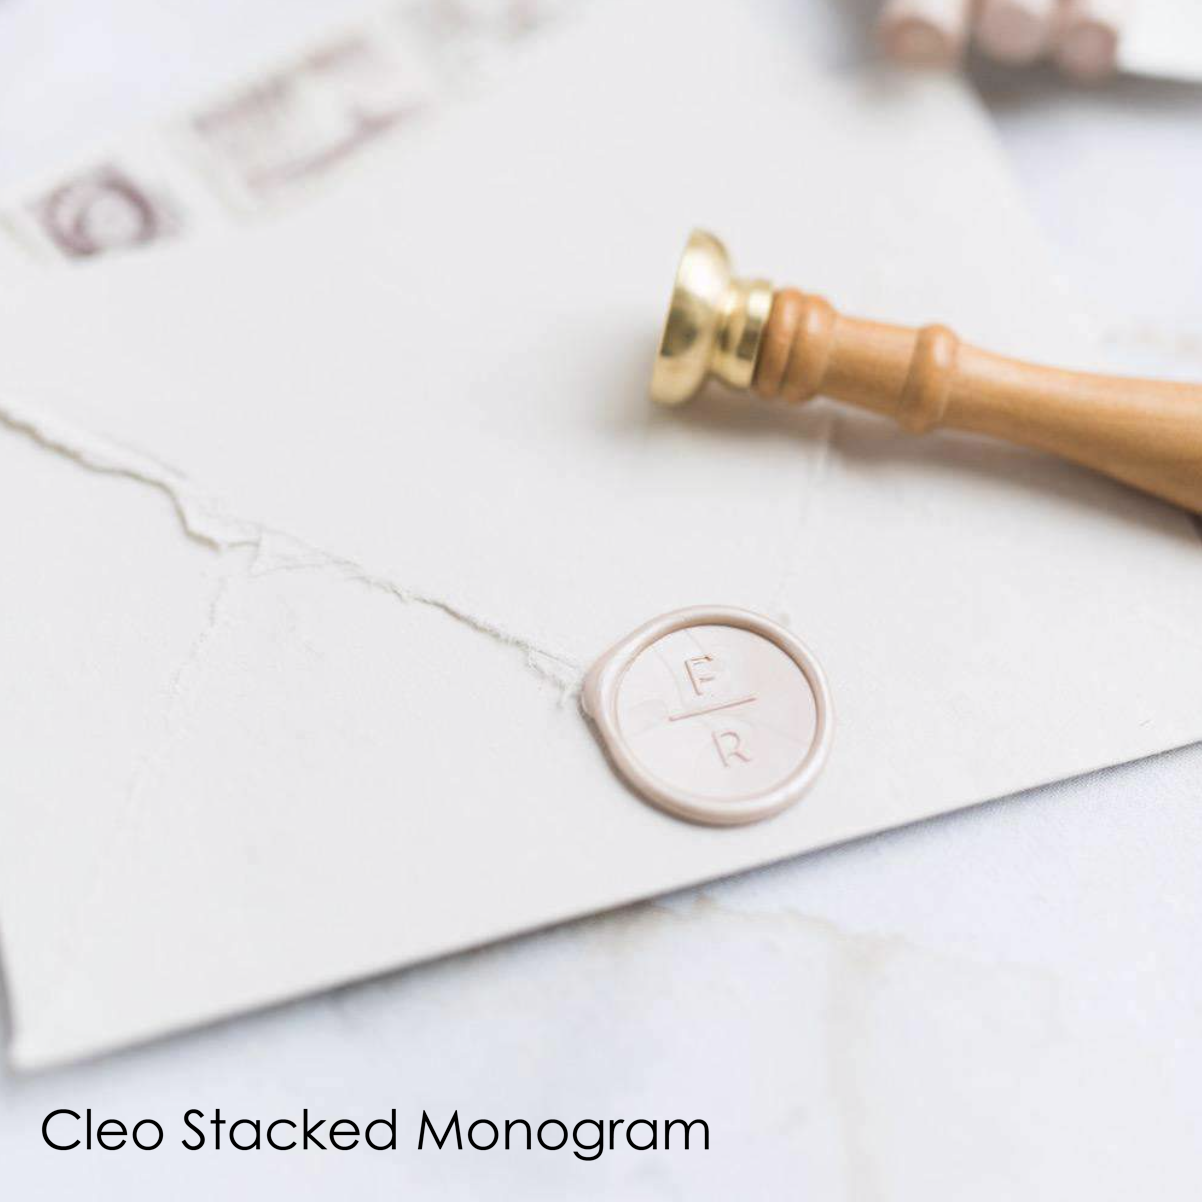 Cleo Stacked Monogram.png